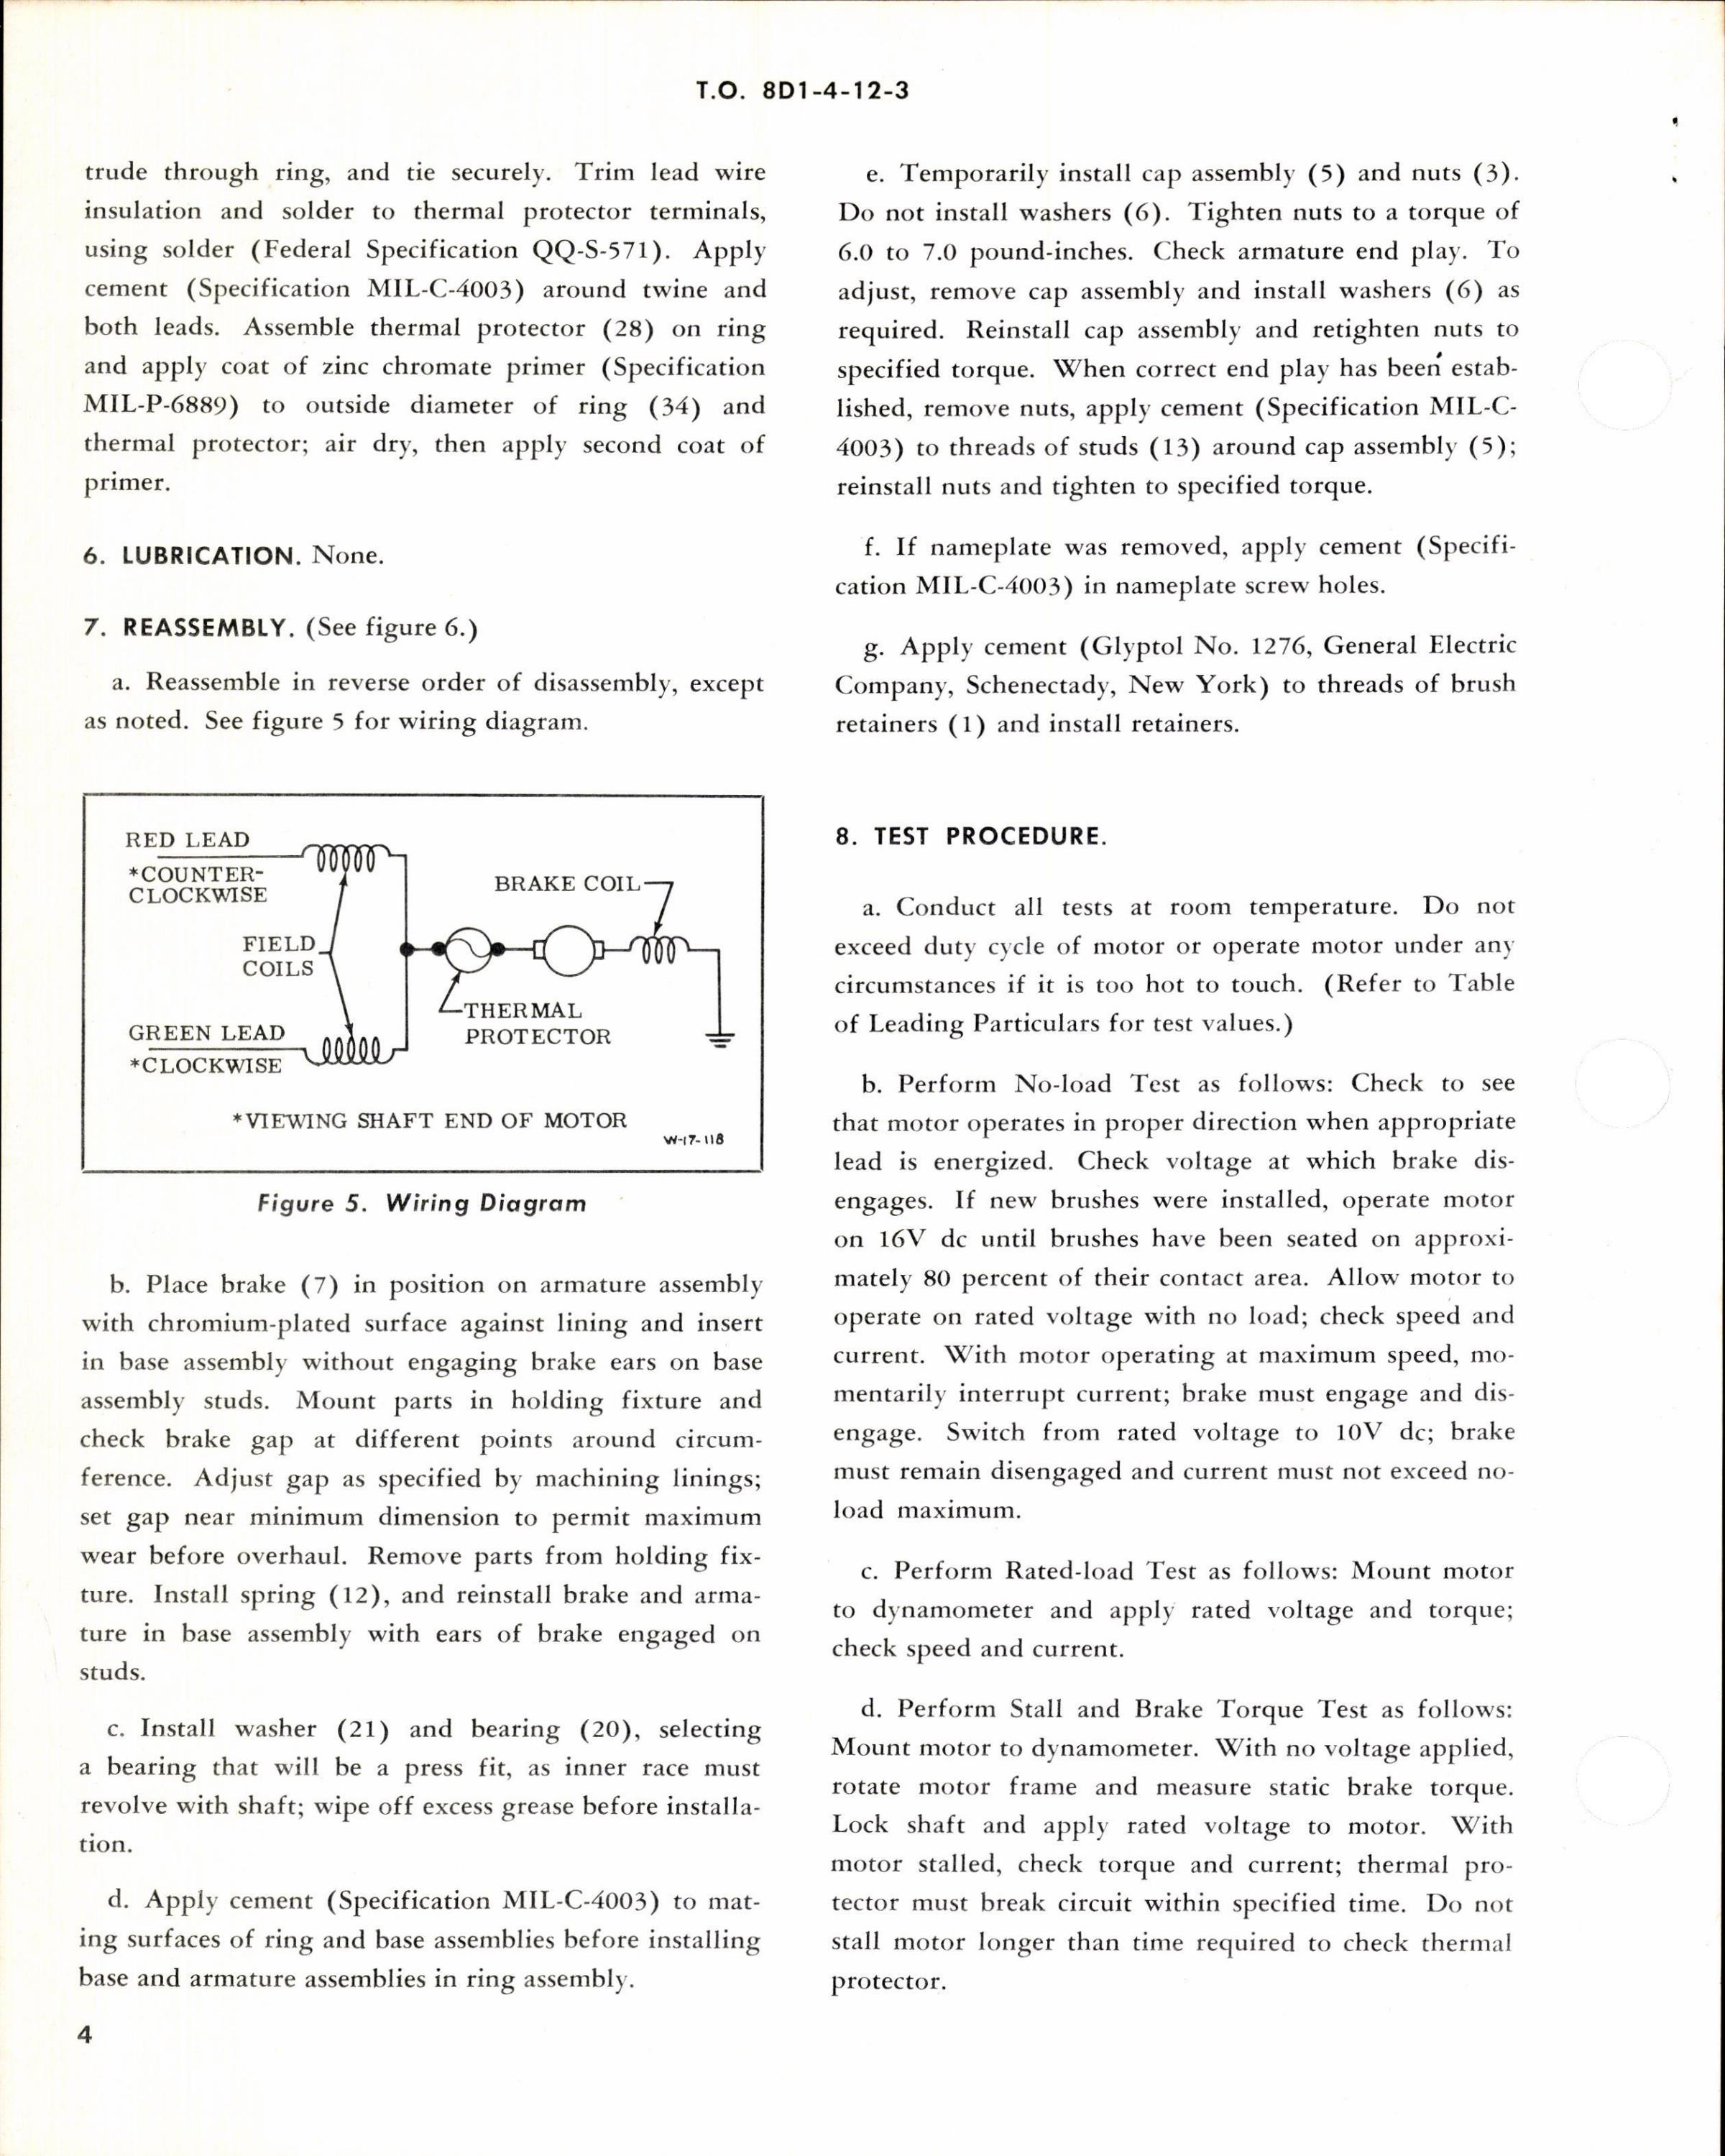 Sample page 4 from AirCorps Library document: Overhaul Instructions with Parts Breakdown for Direct-Current Motor Model DCM20-23, Part No 32409